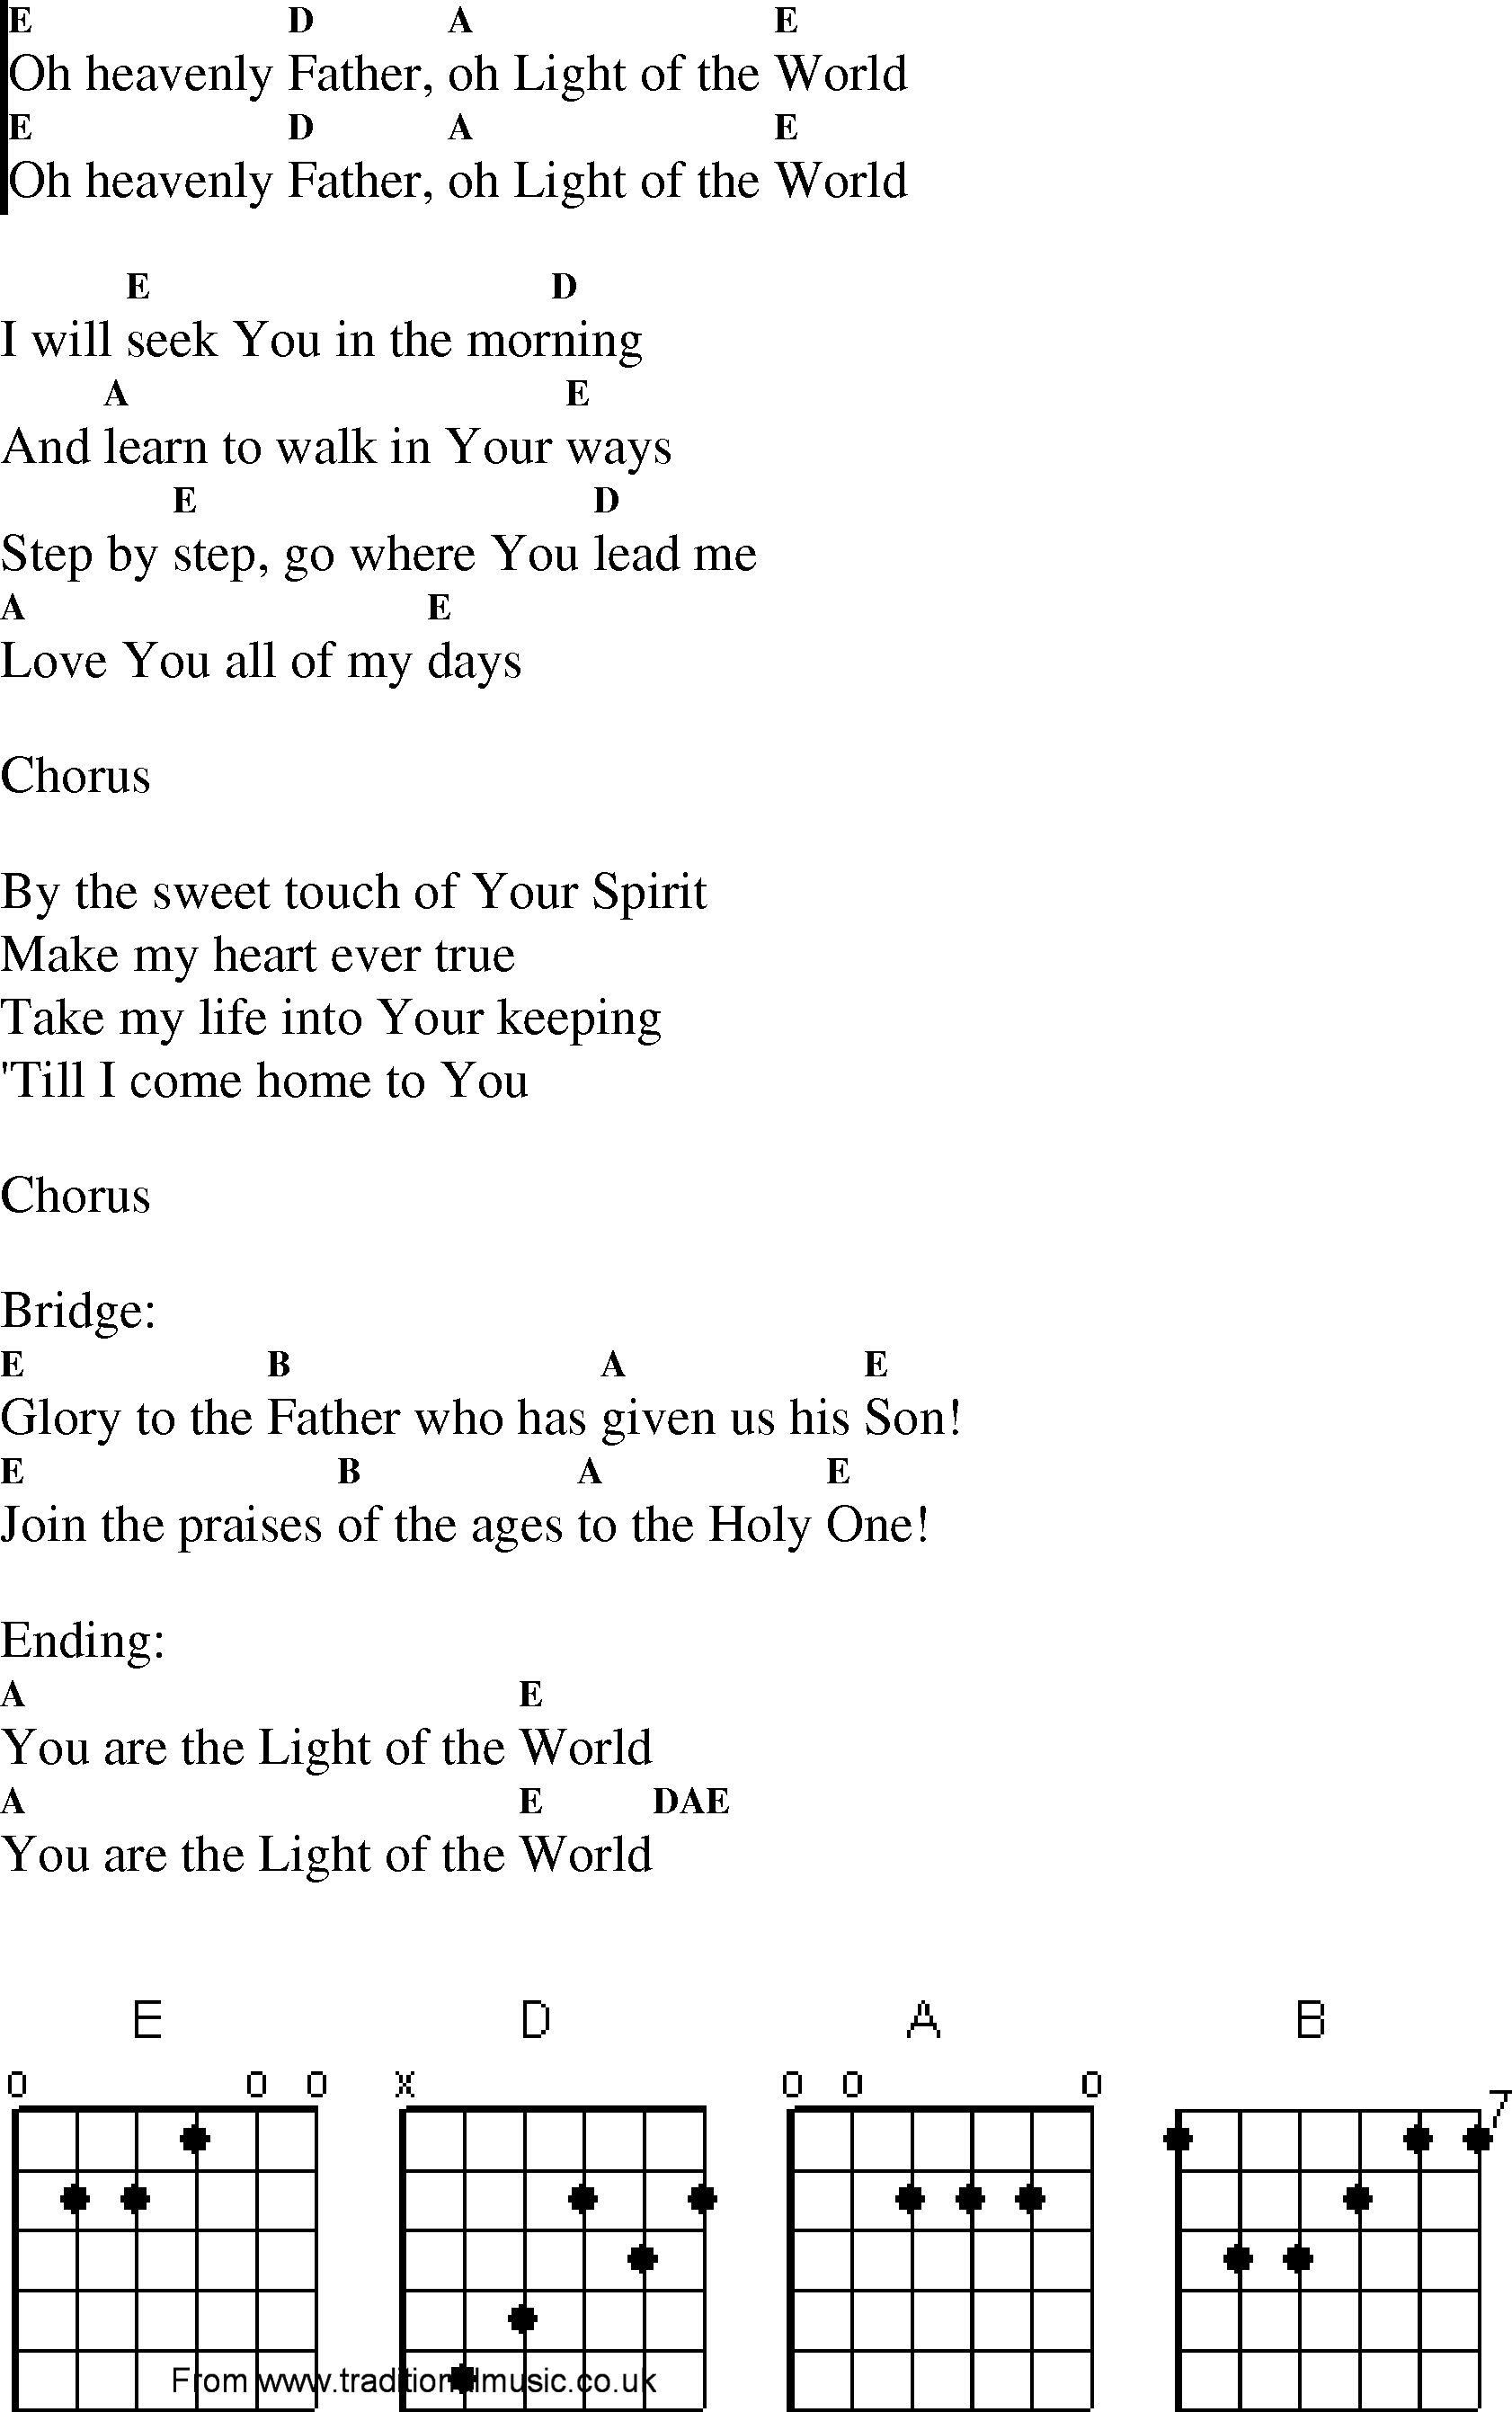 Gospel Song: oh_heavenly_father, lyrics and chords.